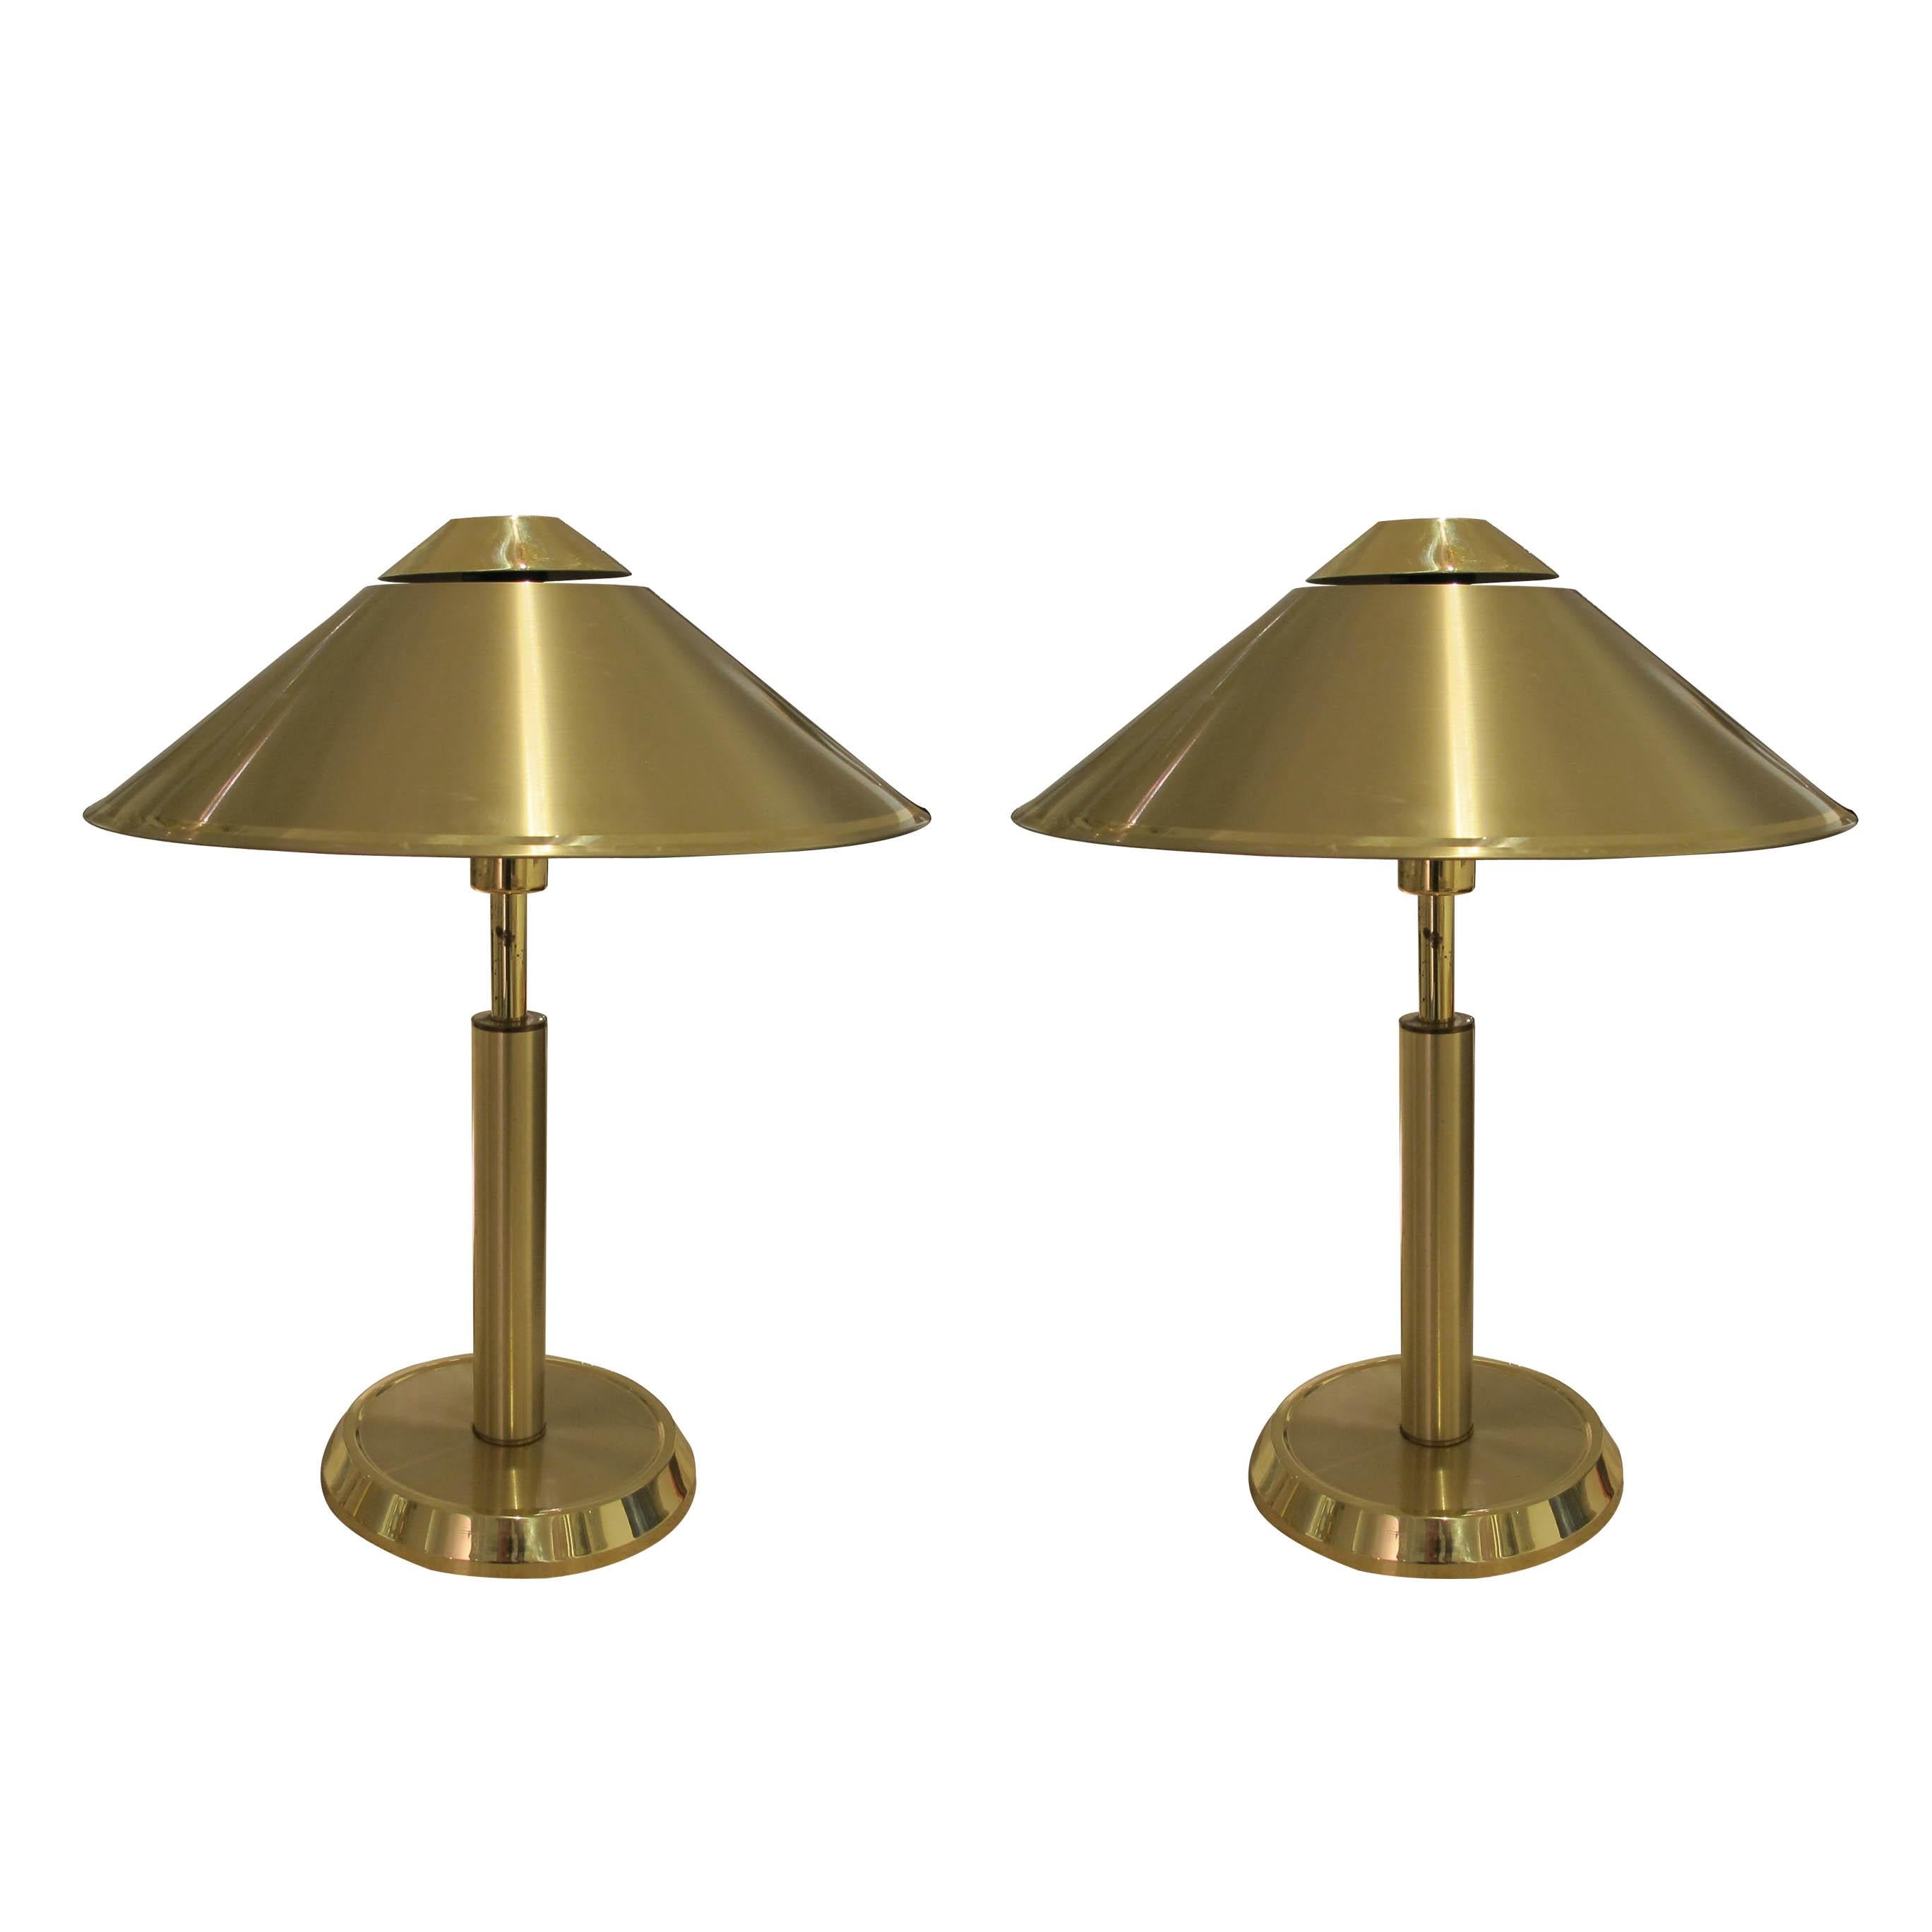 A stunning 1970’s very large pair of brass Swedish table lamps with conic lamp shades. The shape of the shades cast a really warm and beautiful diffuse ambient light. These structural lamps are ideal to create a visual and warm atmosphere. The lamps